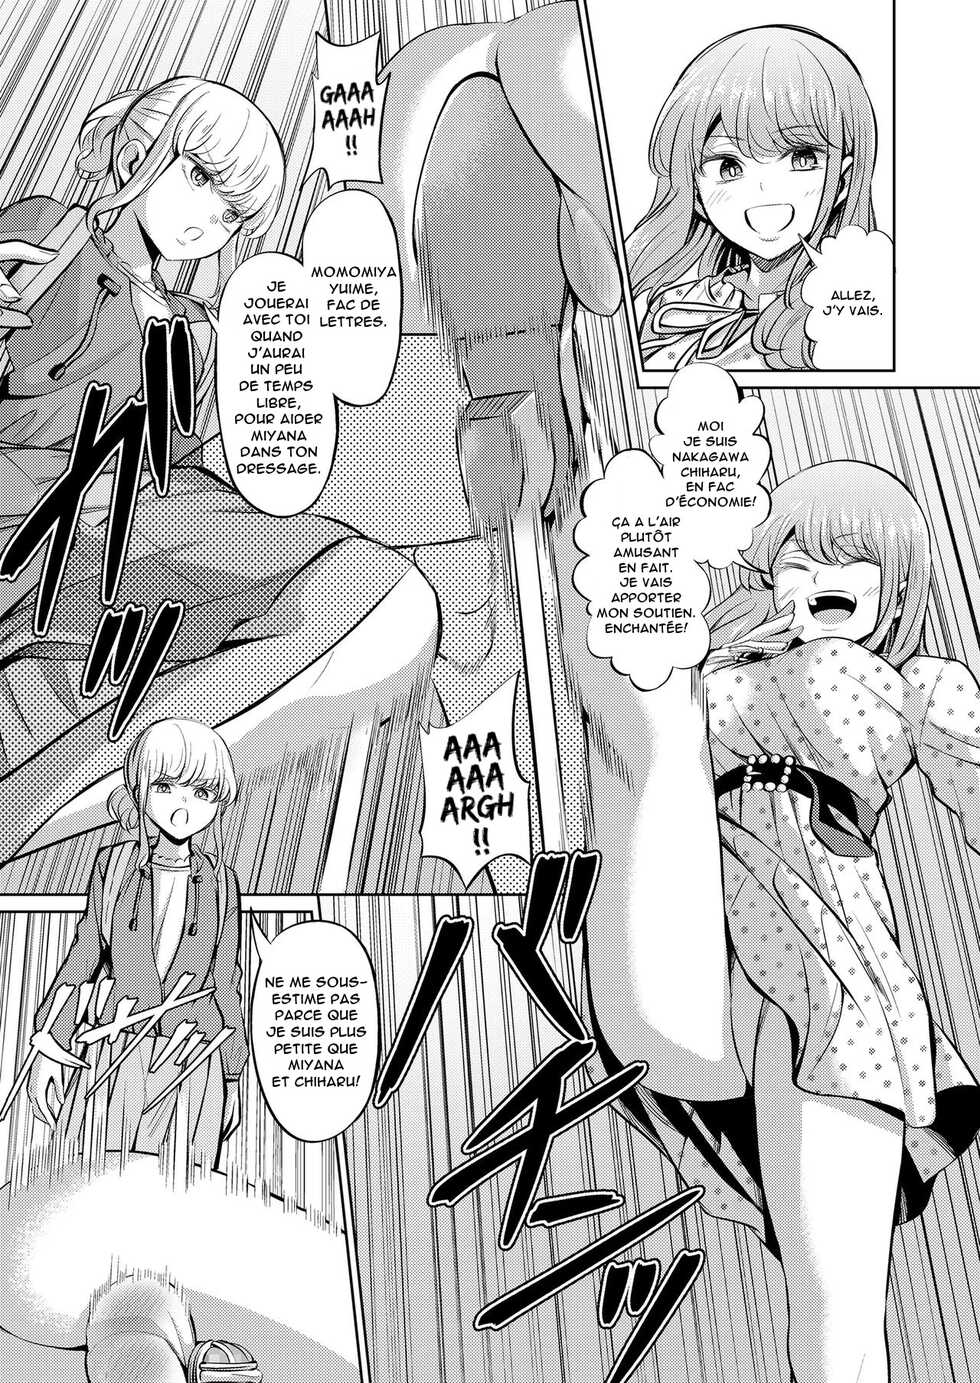 [Yamahata Rian] Tensuushugi no Kuni | A Country Based on Point System (Girls forM Vol. 20) [French] [Anatoh] [Digital] - Page 13